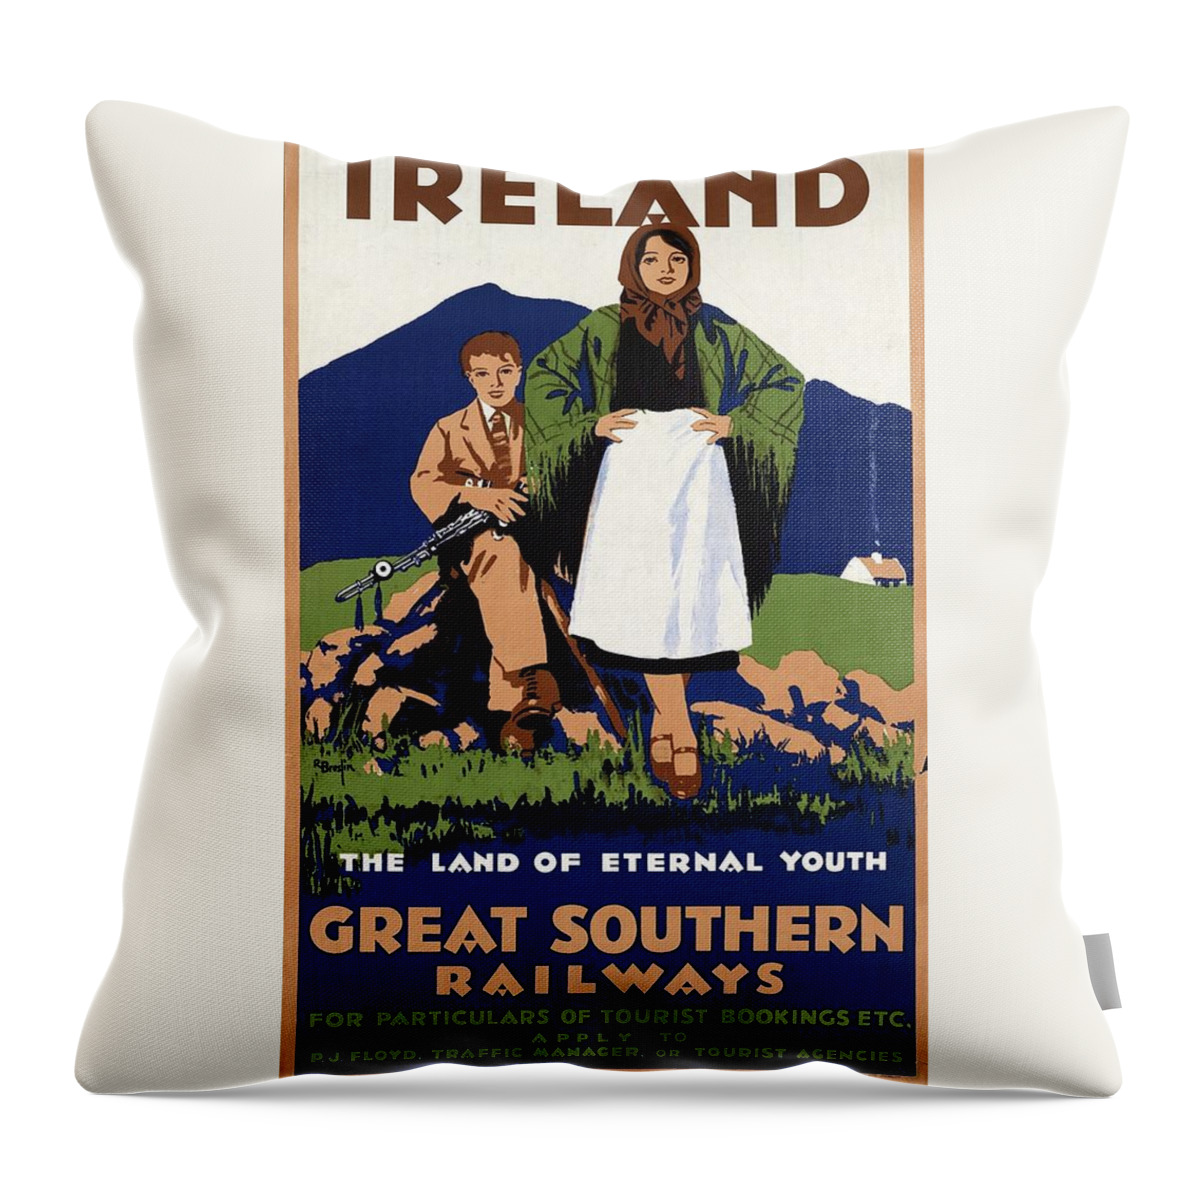 Ireland Throw Pillow featuring the painting Young Irish girl and boy on a meadow - Countryside - Vintage Travel Poster by Studio Grafiikka